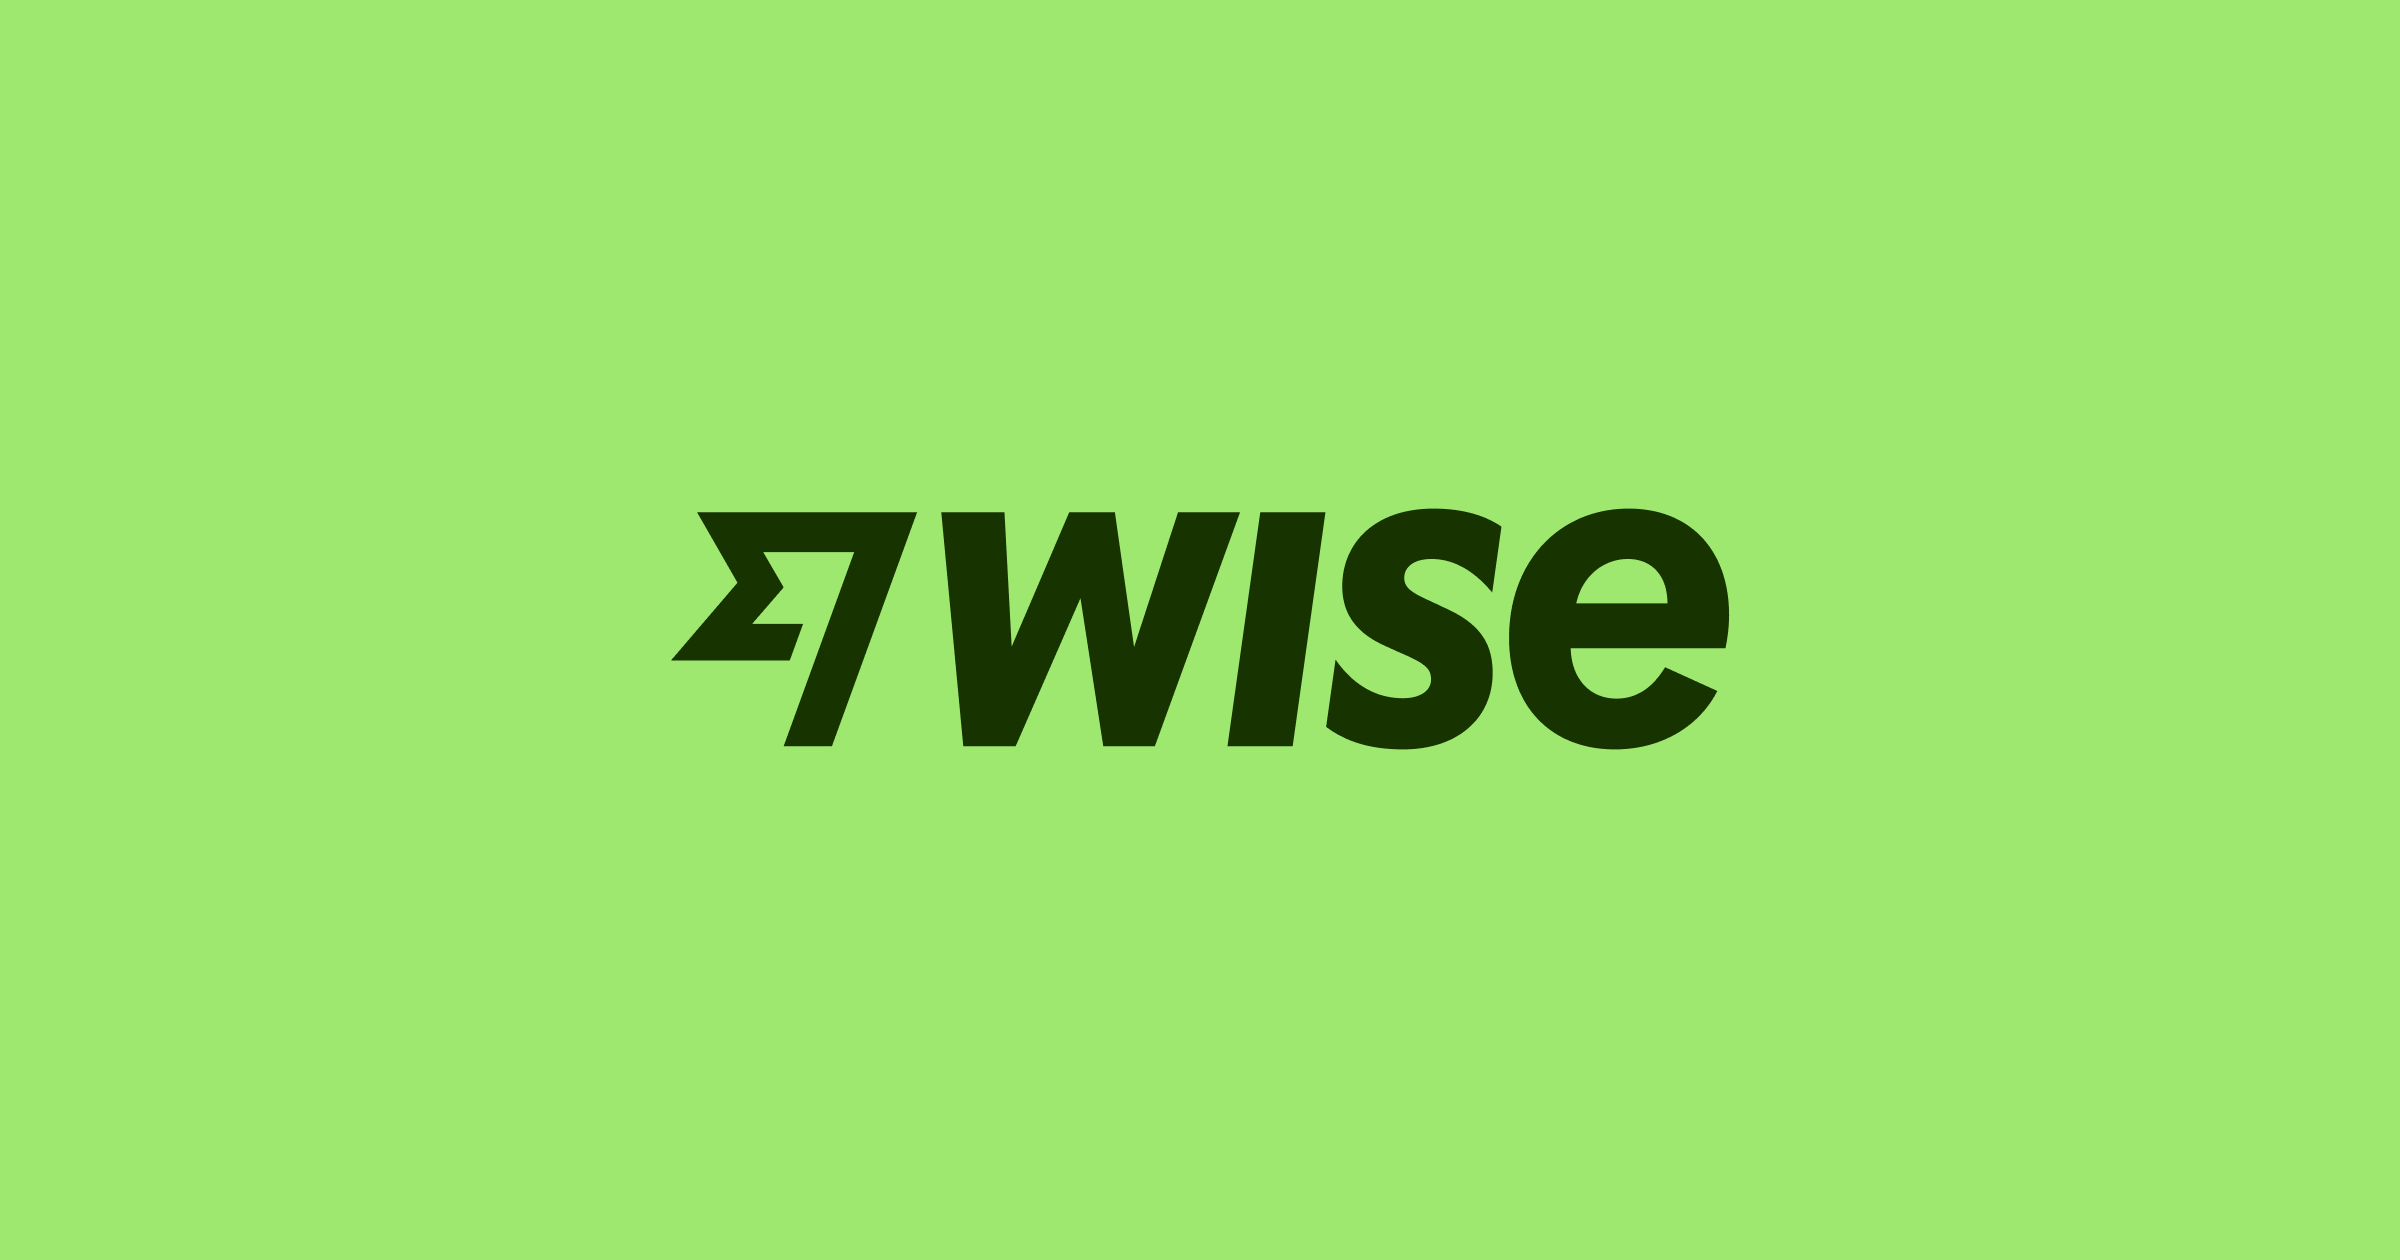 Wise: the international account | Money without borders